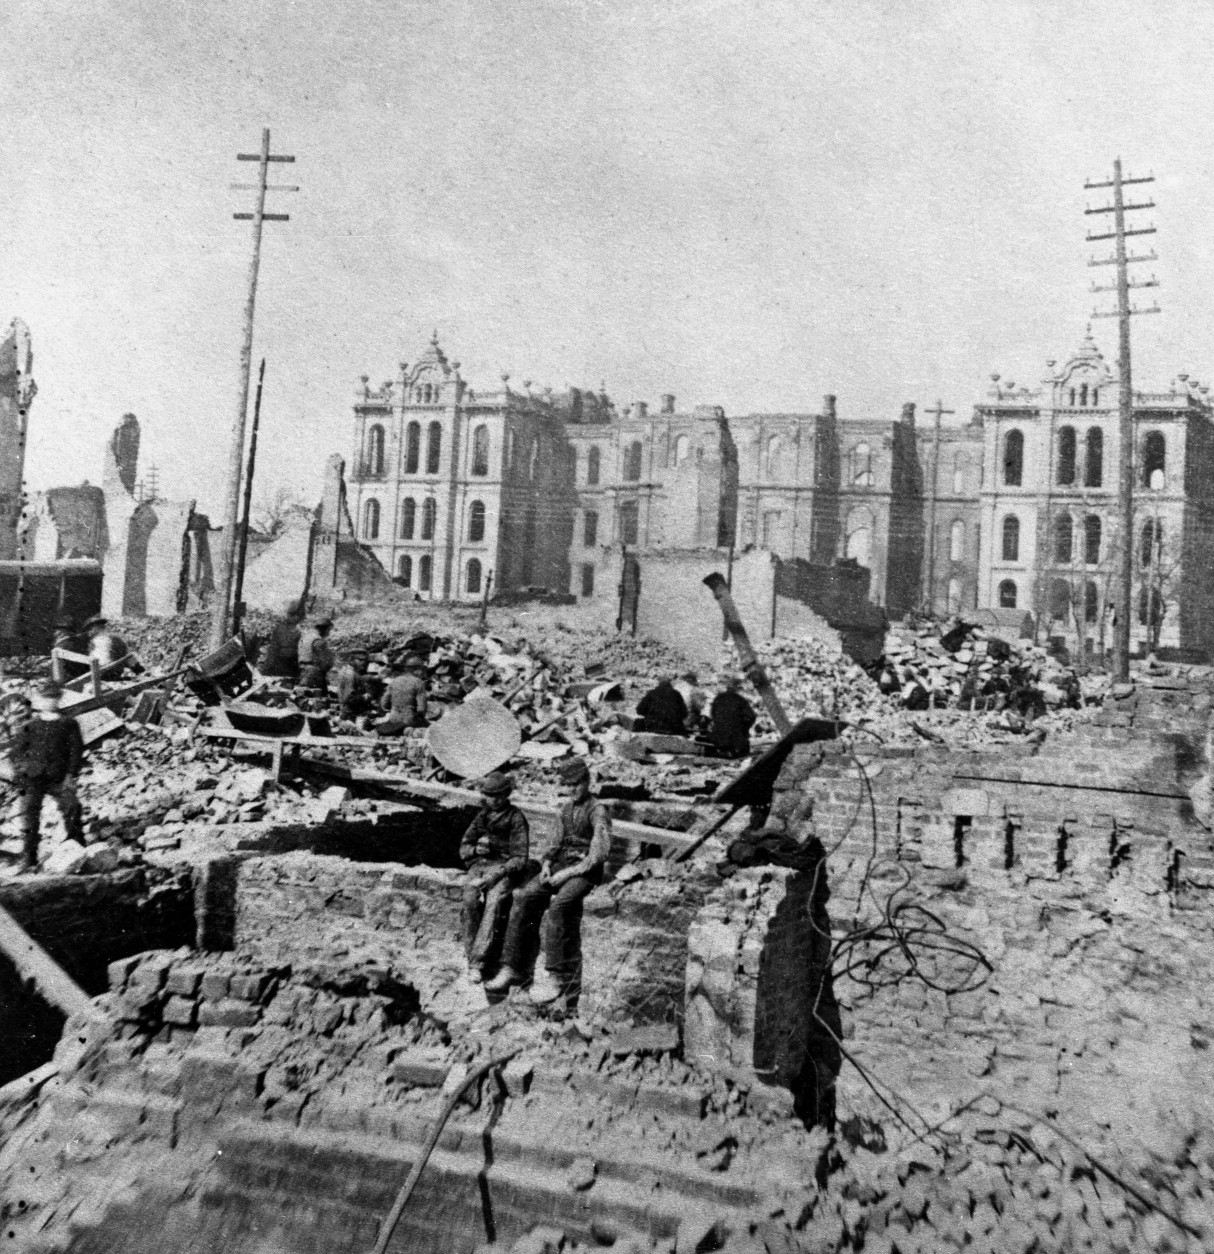 Two boys sit on top of a partial stone wall in the wreckage of a burned-out building at Madison and Clark Streets, with the Court House in the background following the great Chicago fire of October 8 - 10, 1871, Chicago, Illinois. (Photo by Hulton|Archive/Getty Images)